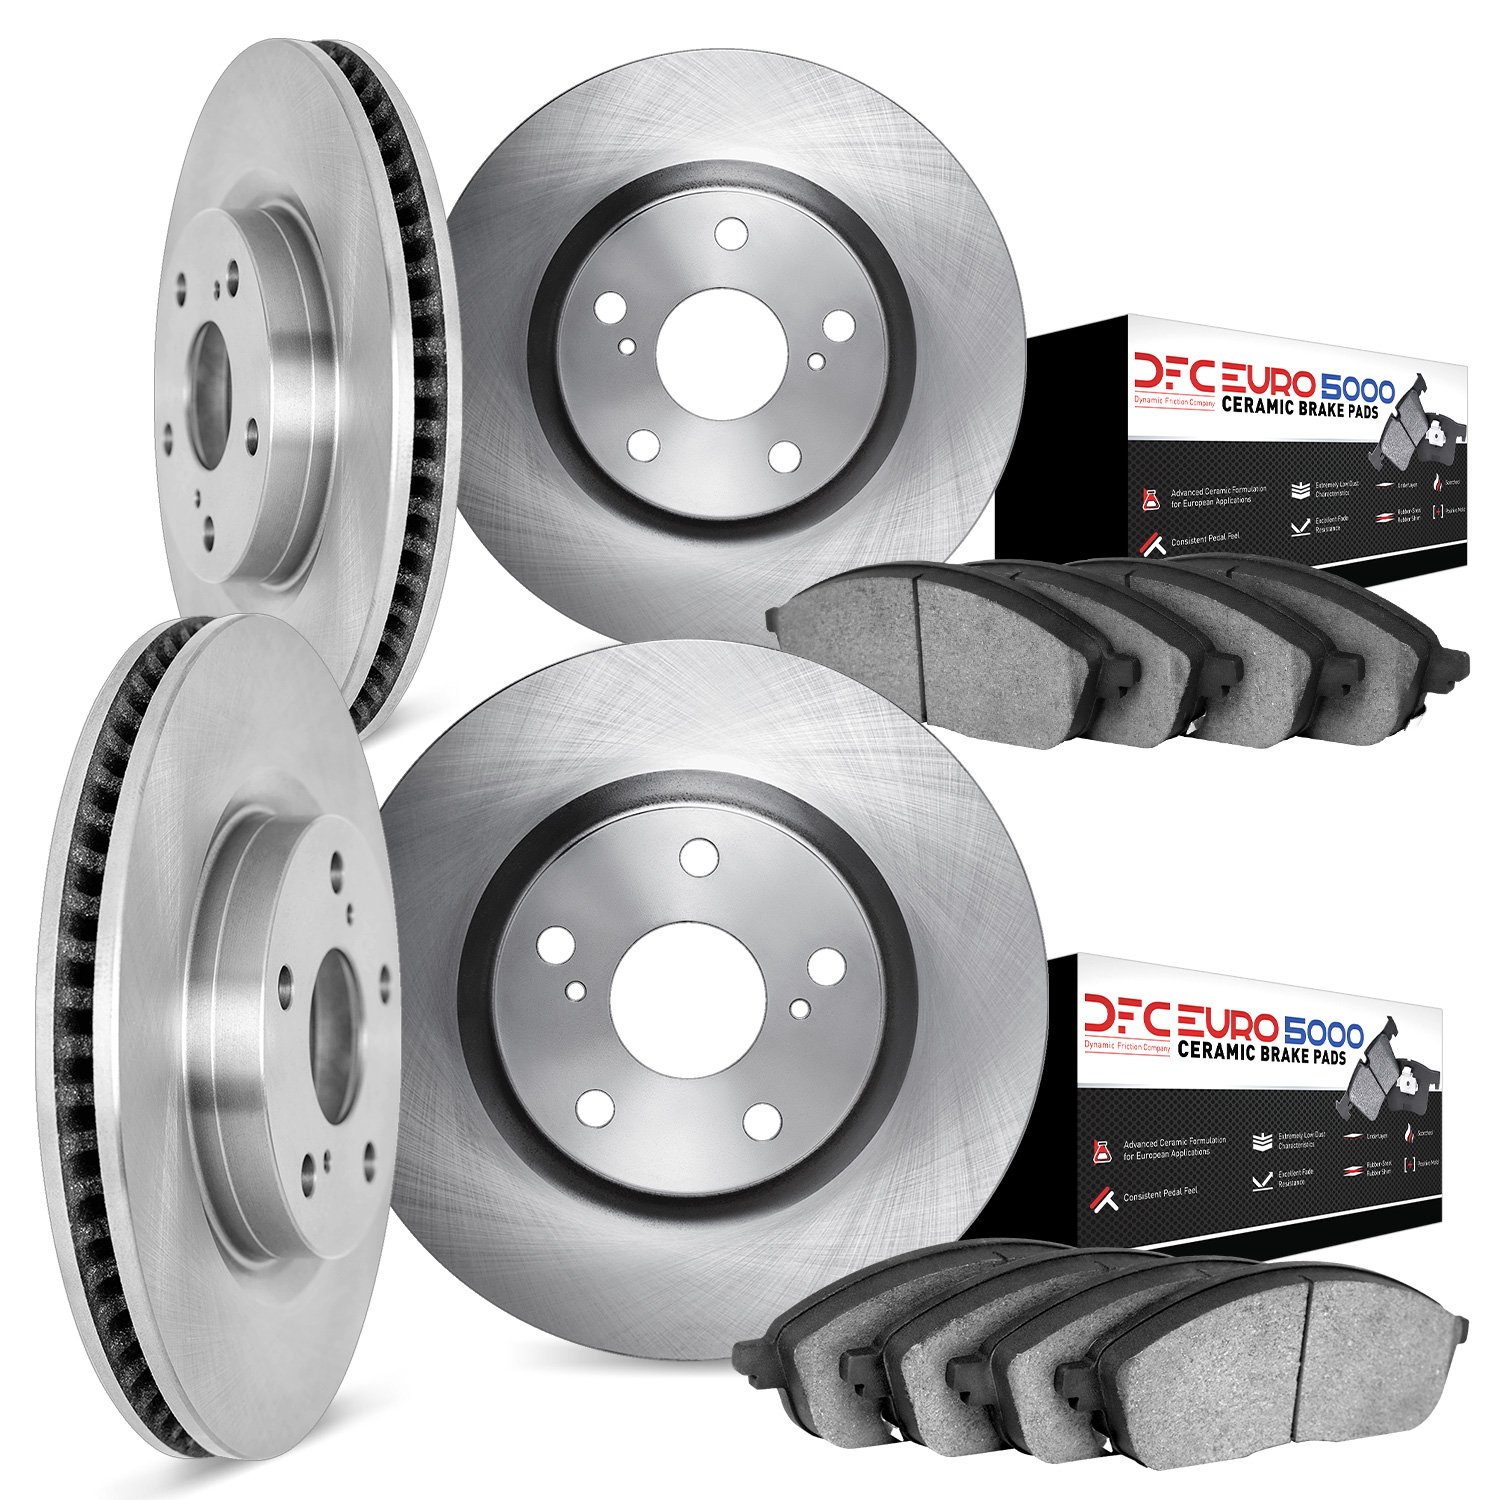 6604-63024 Brake Rotors w/5000 Euro Ceramic Brake Pads, 2010-2016 Mercedes-Benz, Position: Front and Rear